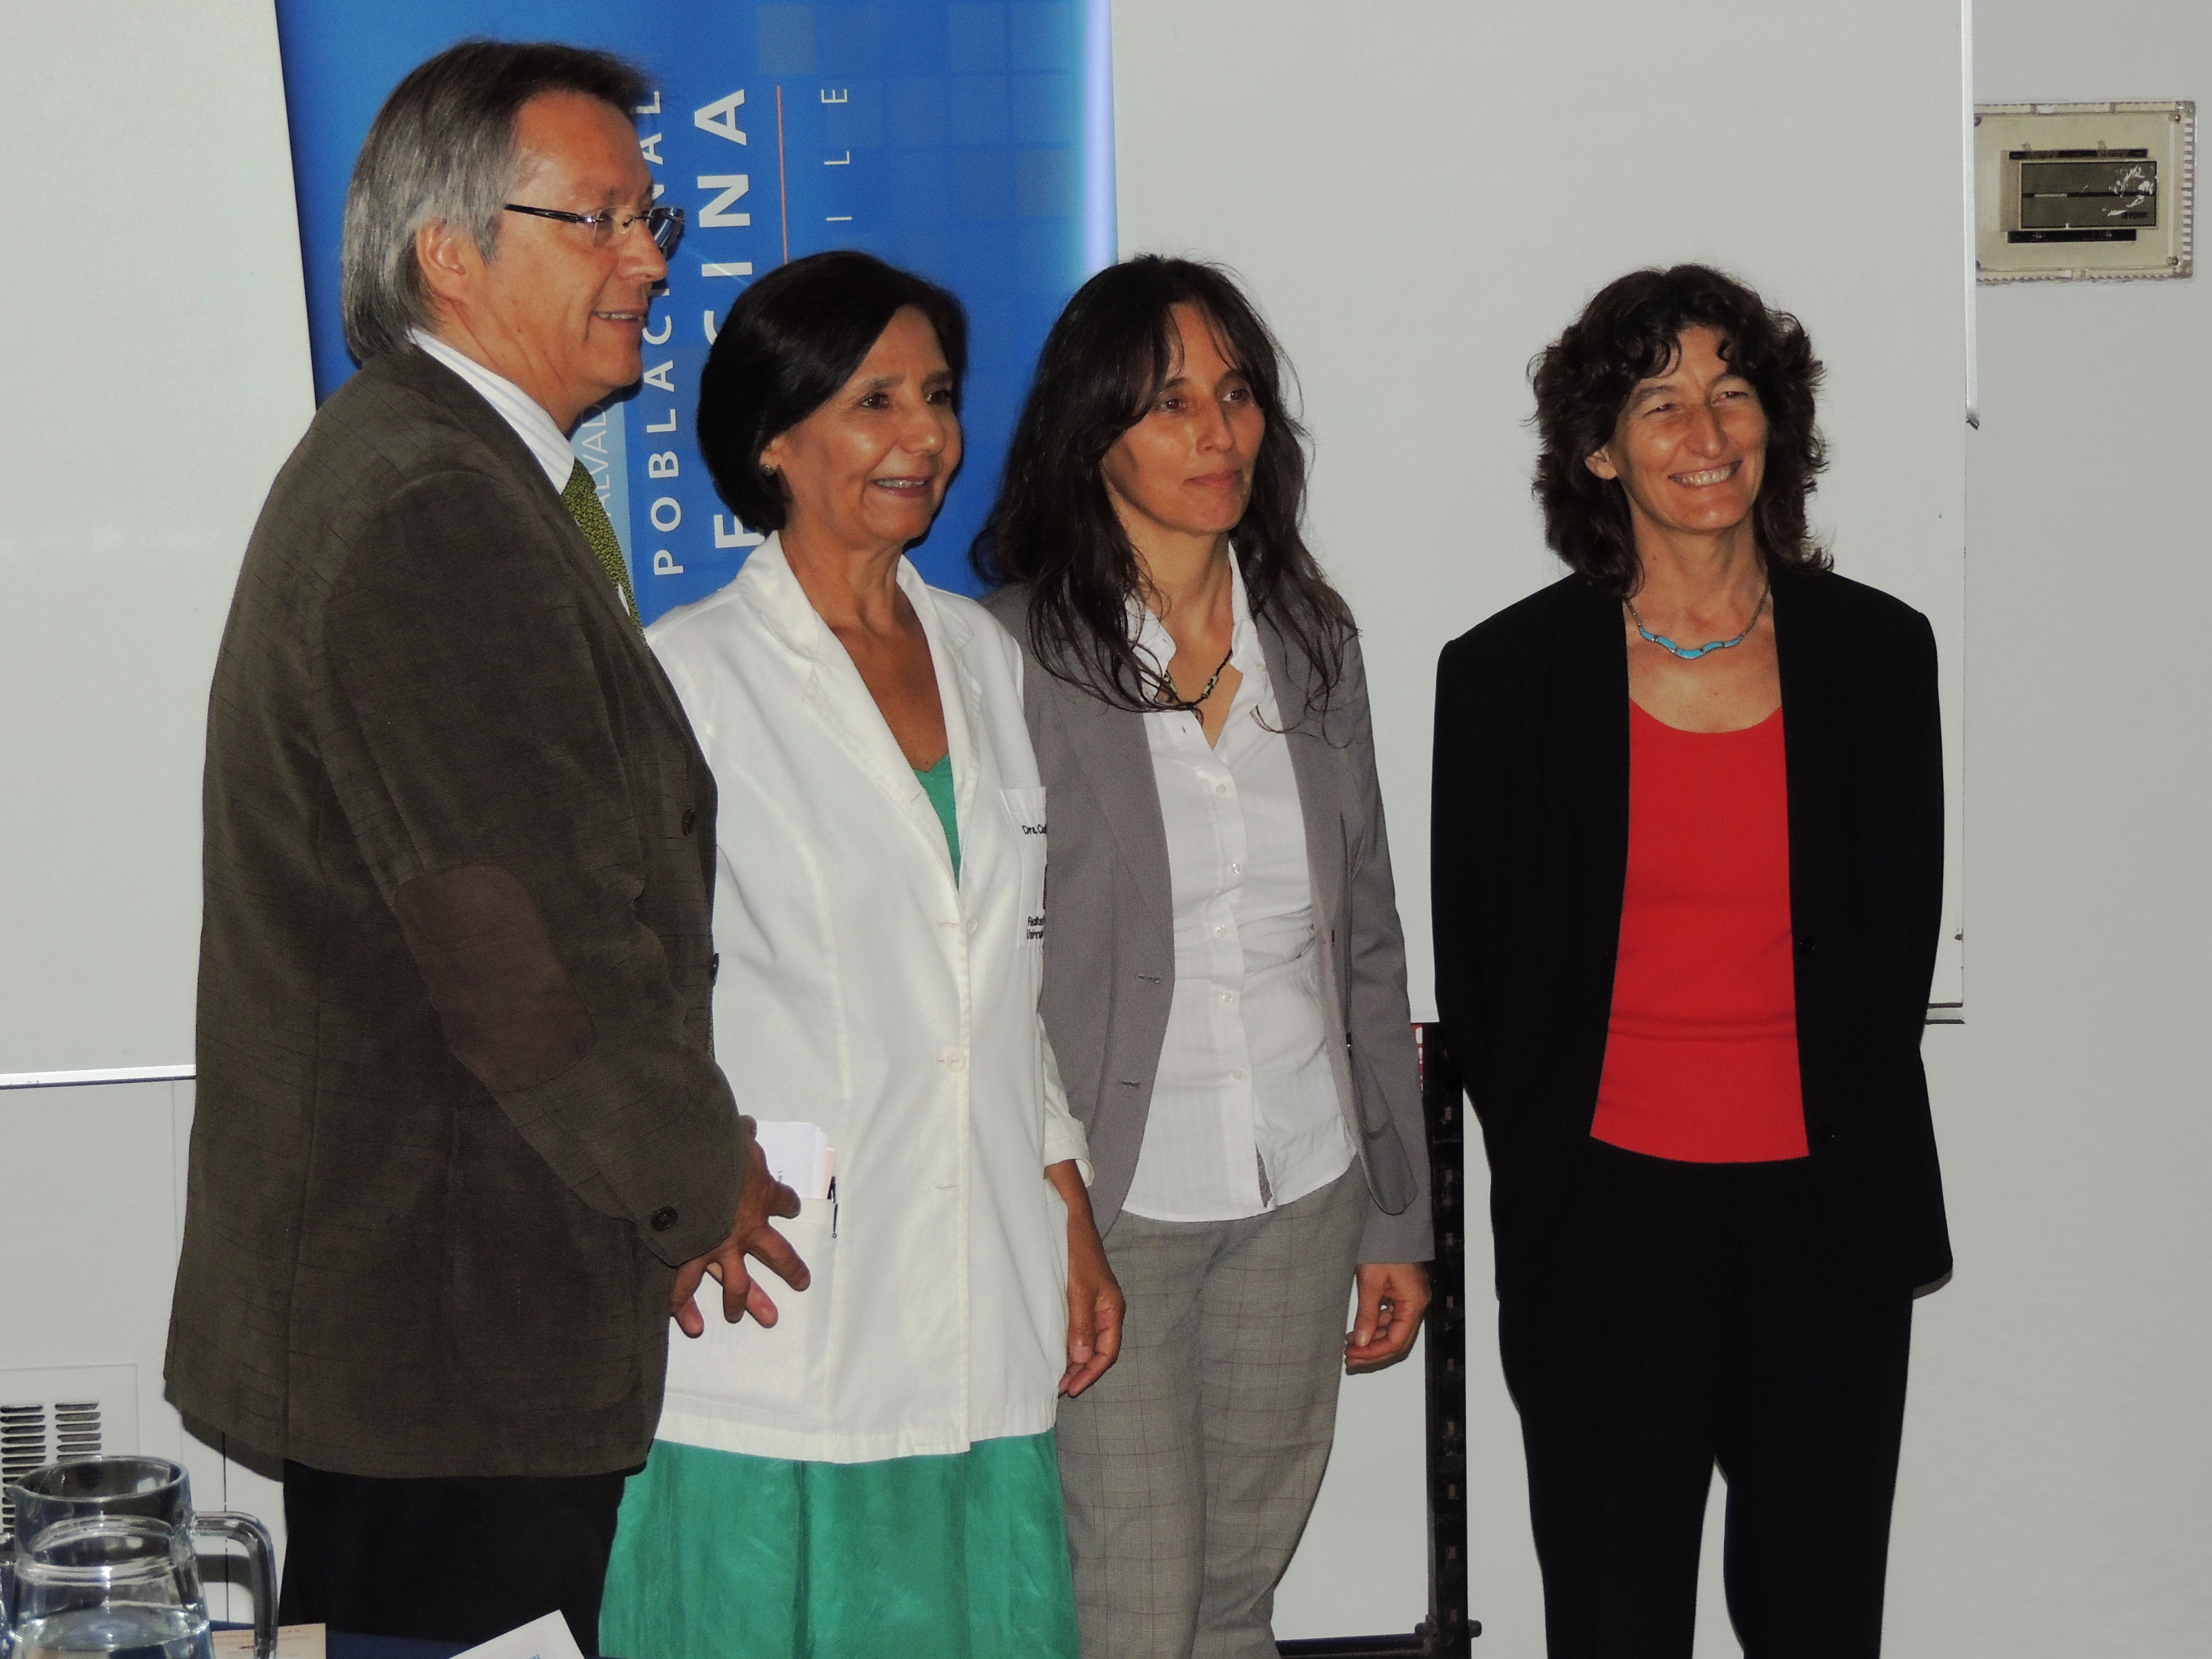 Public presentation of the project in Chile